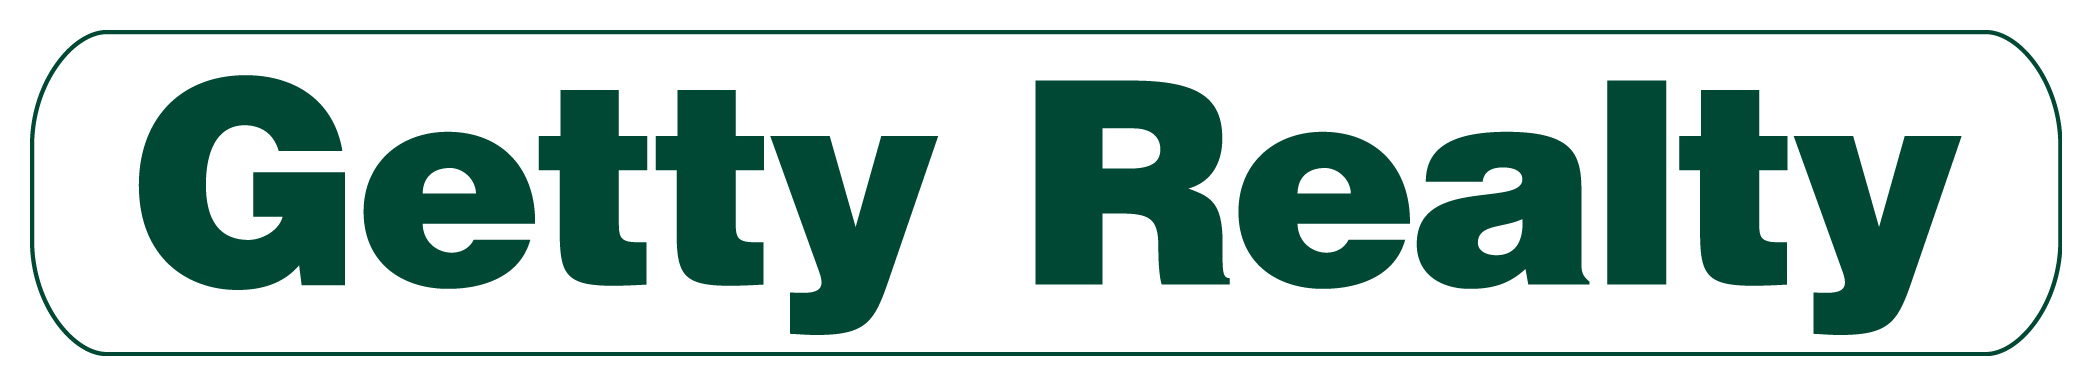 Getty Realty Corp. Logo